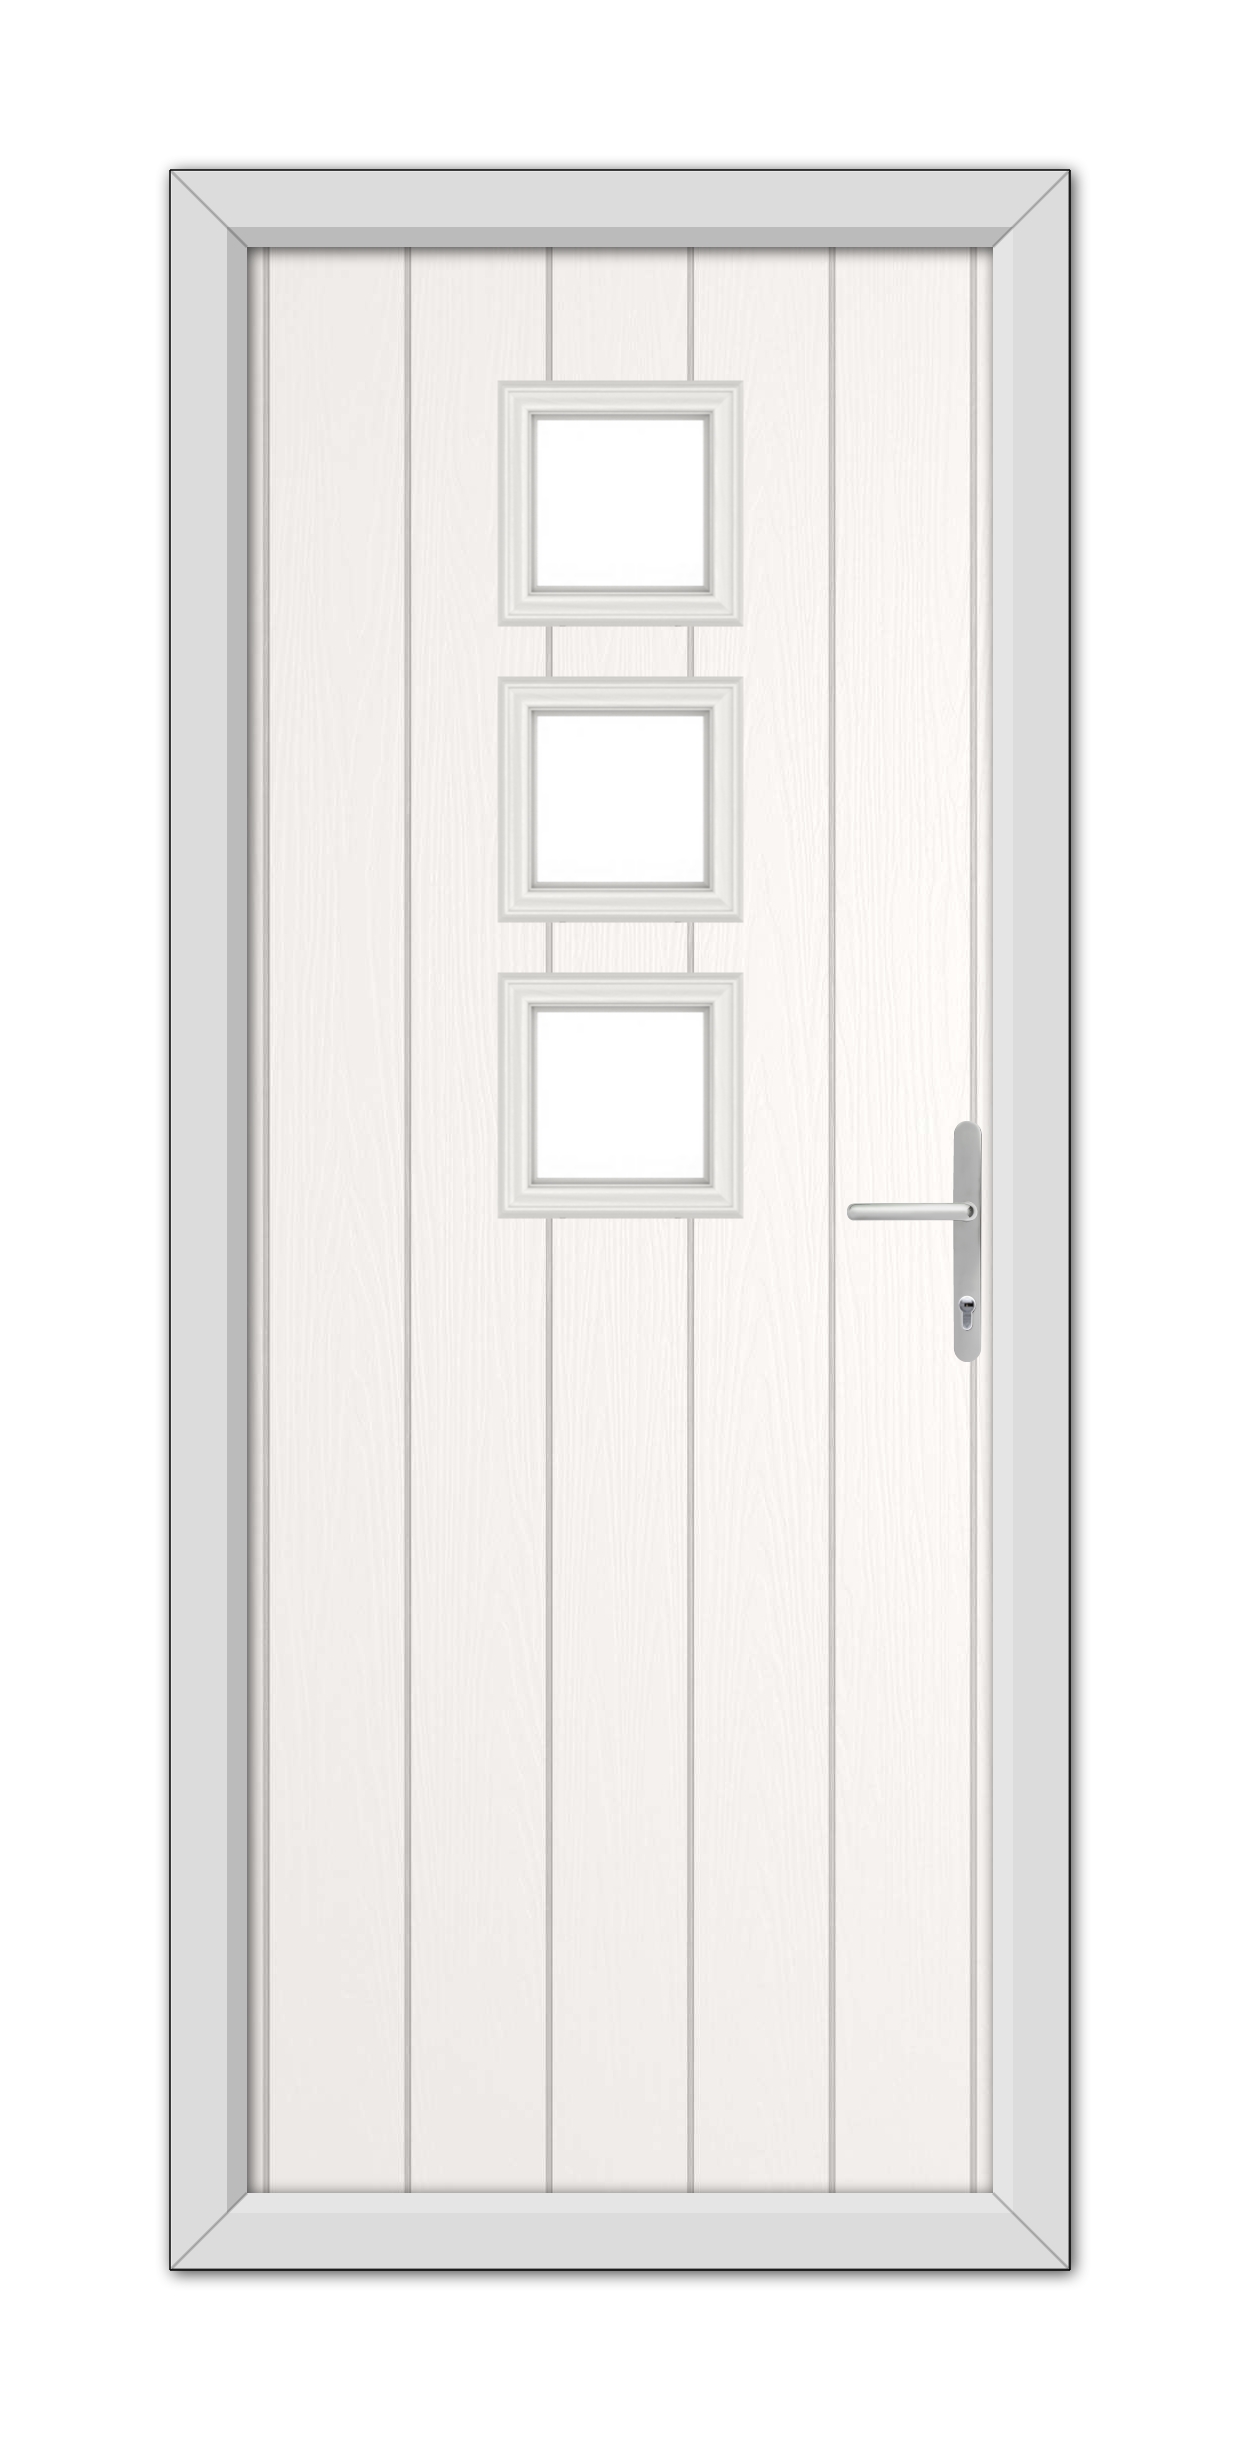 A modern White Montrose Composite Door 48mm Timber Core featuring three square windows and a metallic handle, set within a simple frame.